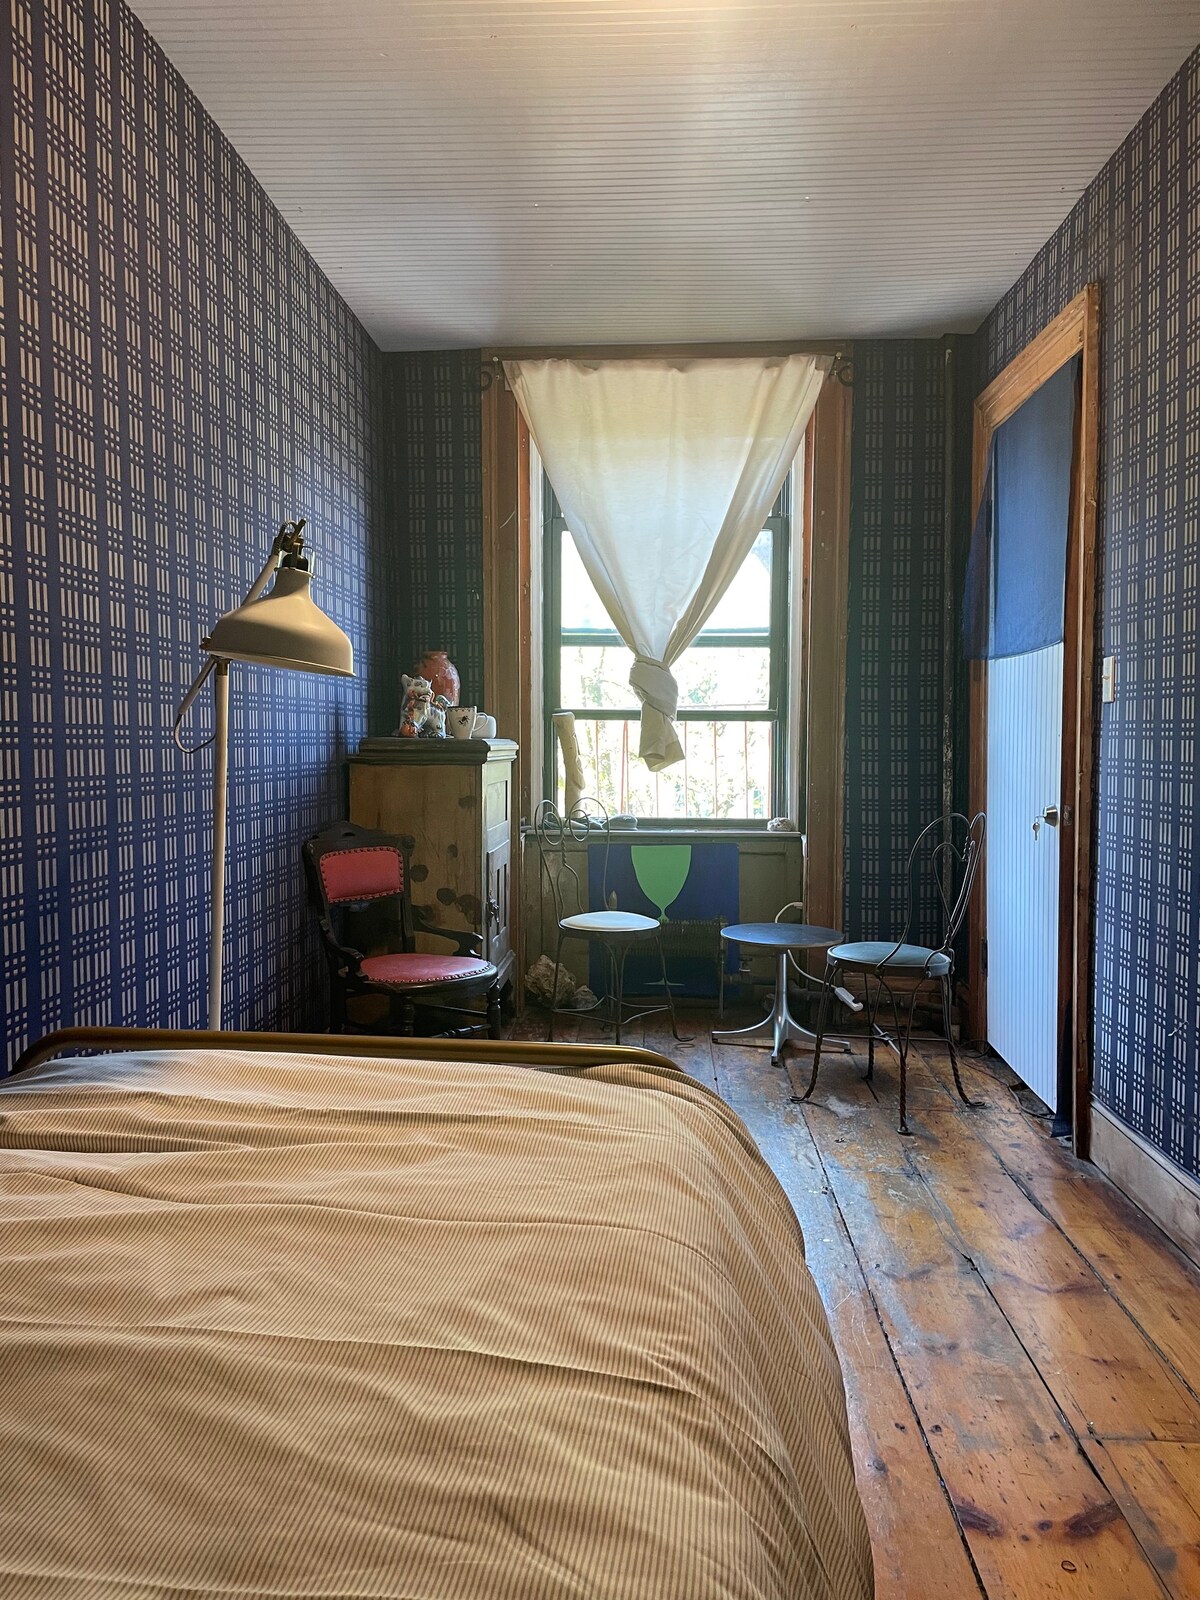 A private bedroom in Brooklyn heights